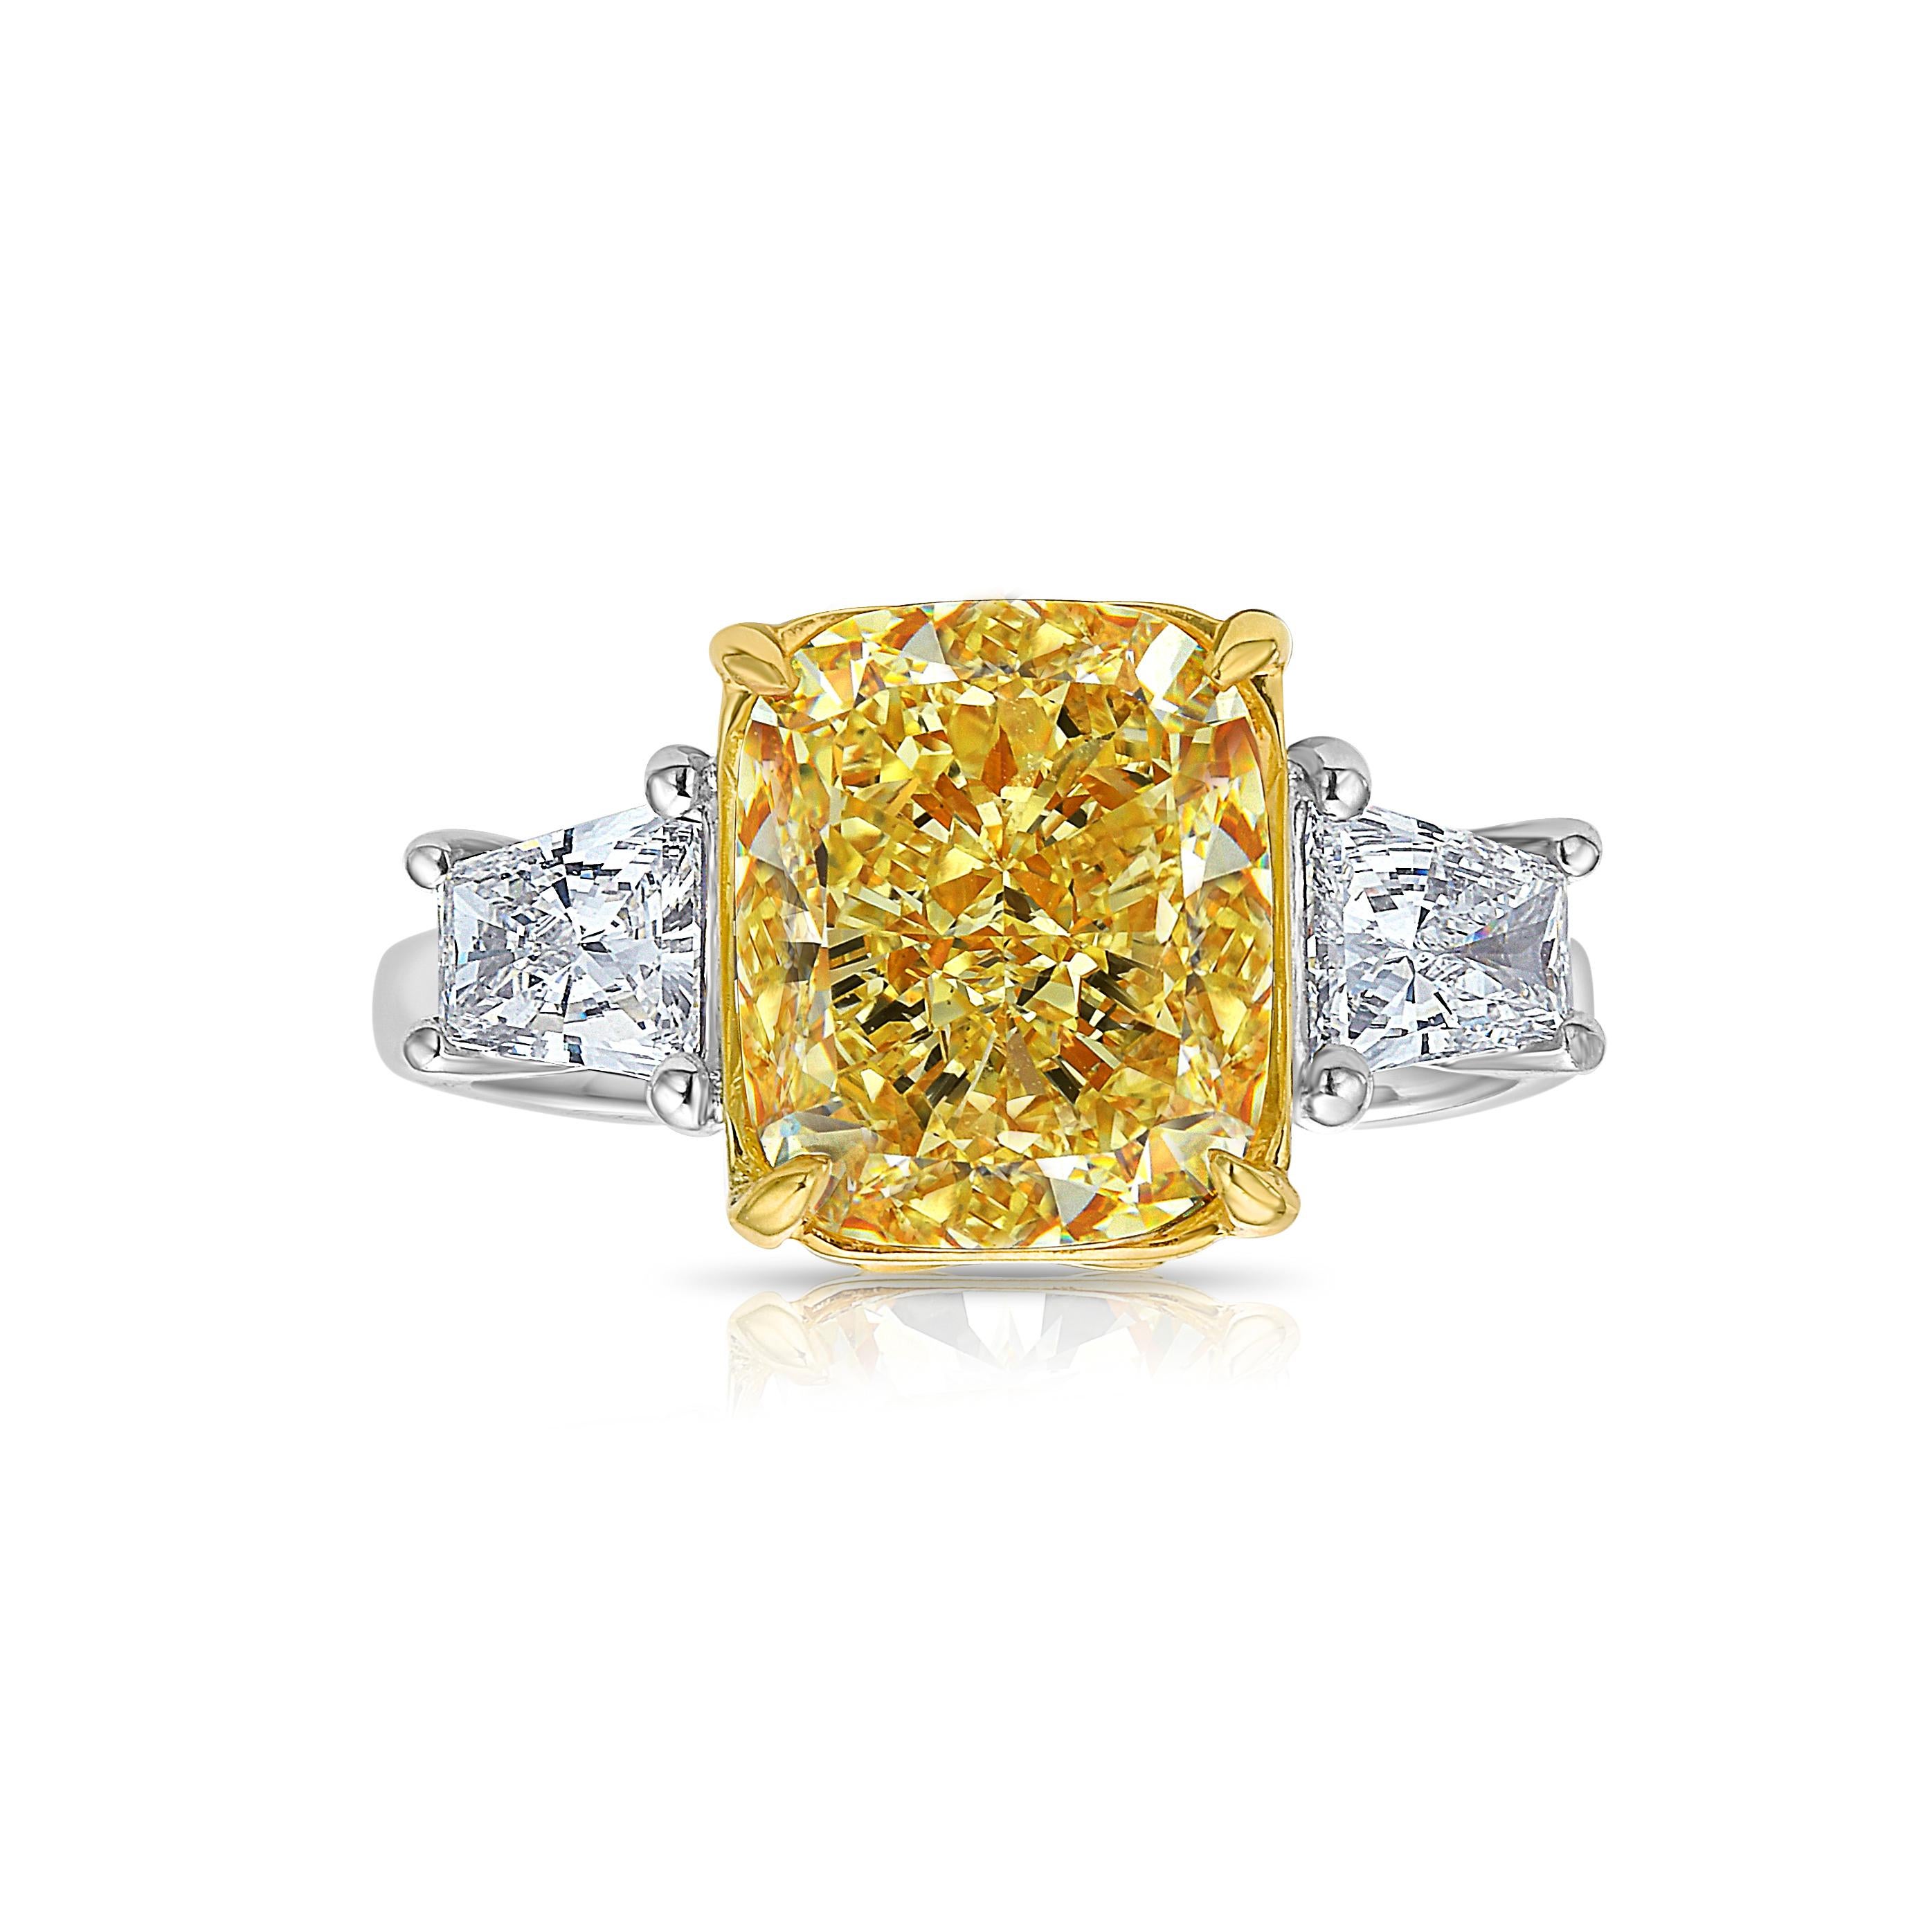 4.84 Carat Fancy Yellow
Cushion Cut Center Diamond
VS2 Clarity
0.72 Carats of Side Trapezoids
GIA Certified Diamond
Crafted in Platinum & 18k Yellow Gold
Handmade in NYC

This piece can be viewed before purchase in our showroom in NYC, or at one of